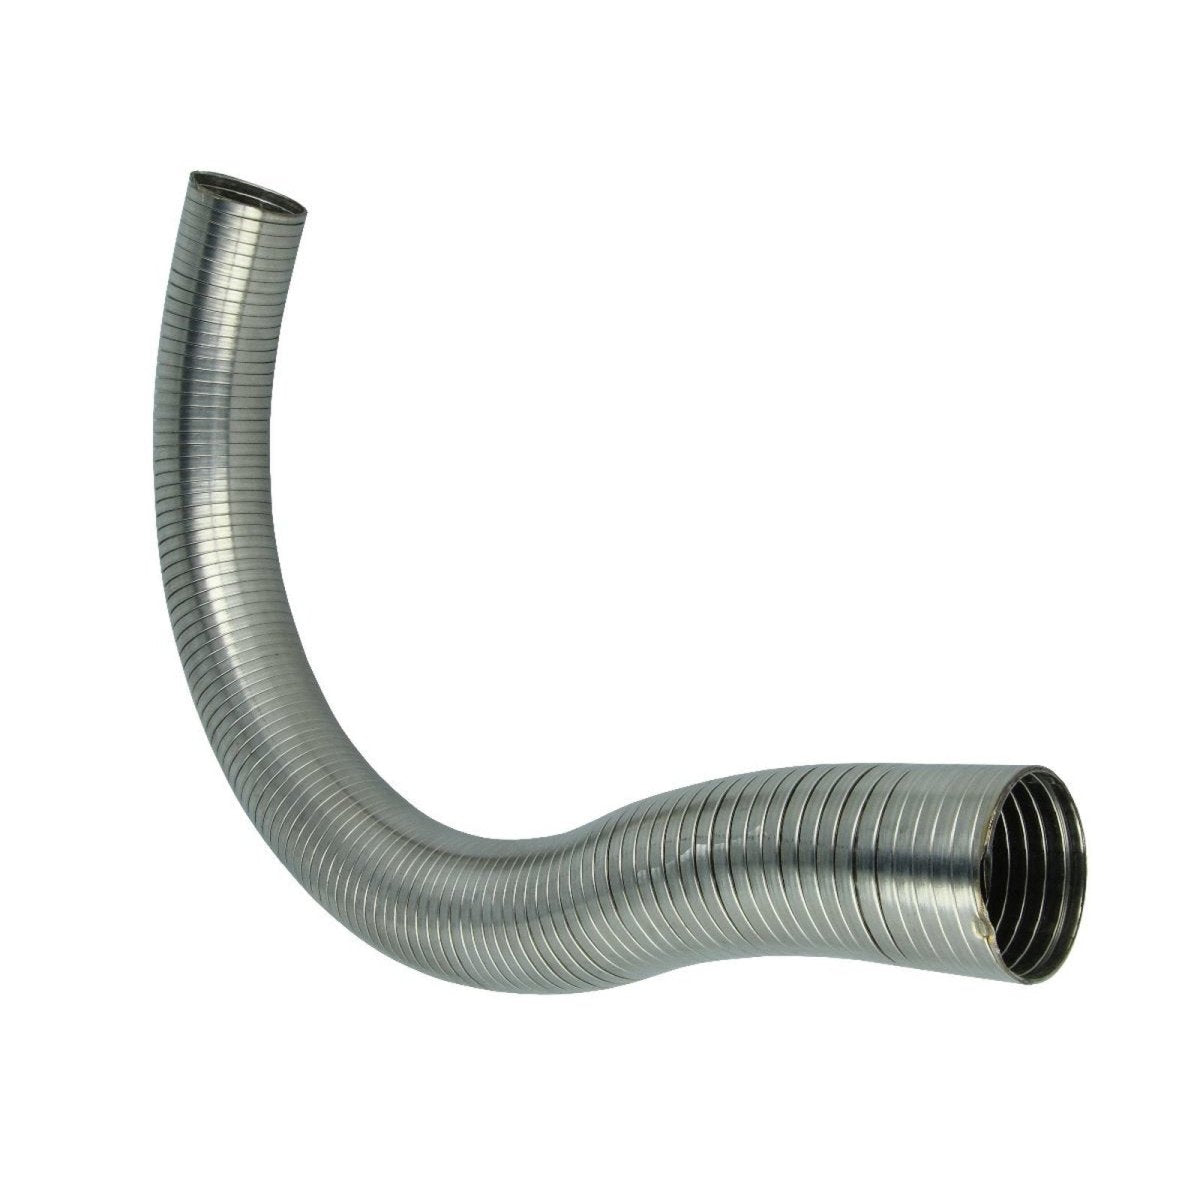 FAMEFORM flexible corrugated exhaust pipe (stainless steel) - PARTS33 GmbH